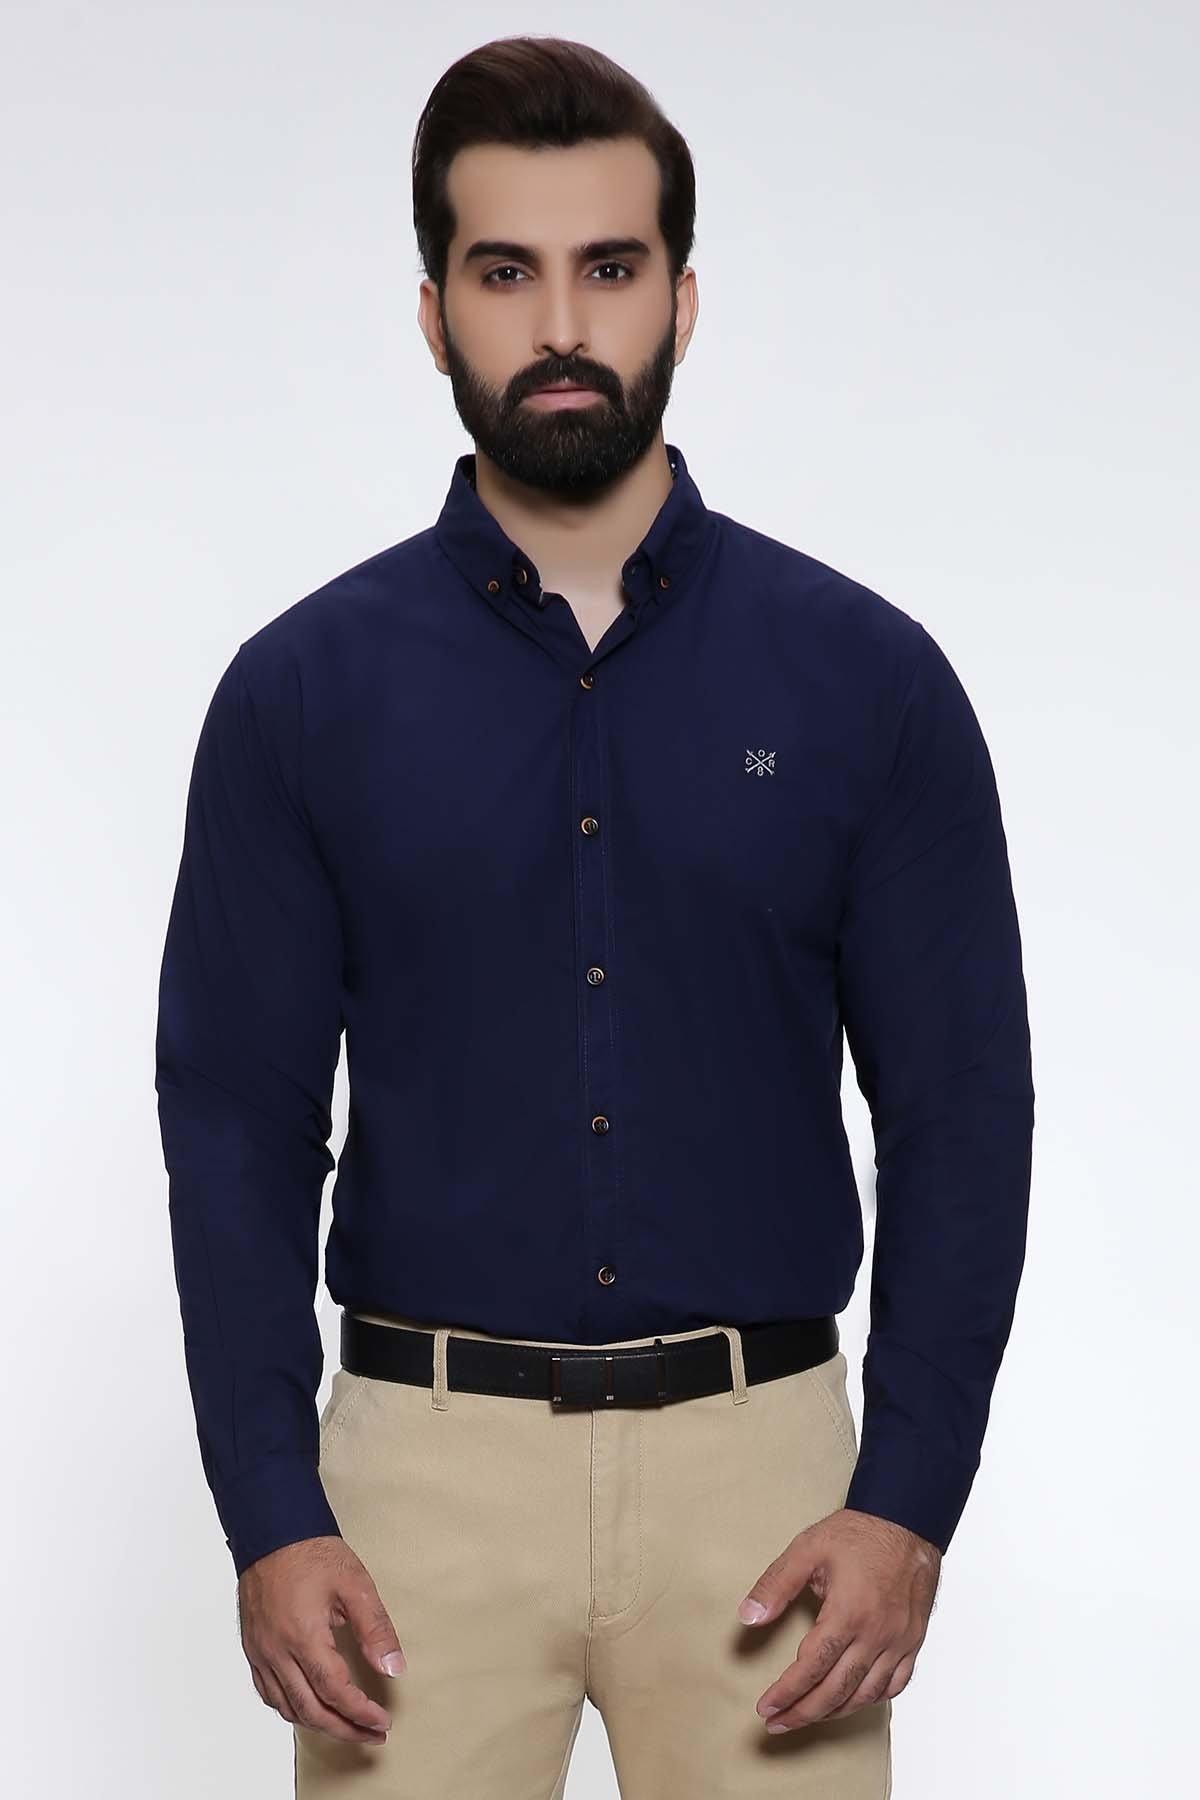 CASUAL SHIRT FULL SLEEVE NAVY SLIM FIT PRE FALL at Charcoal Clothing